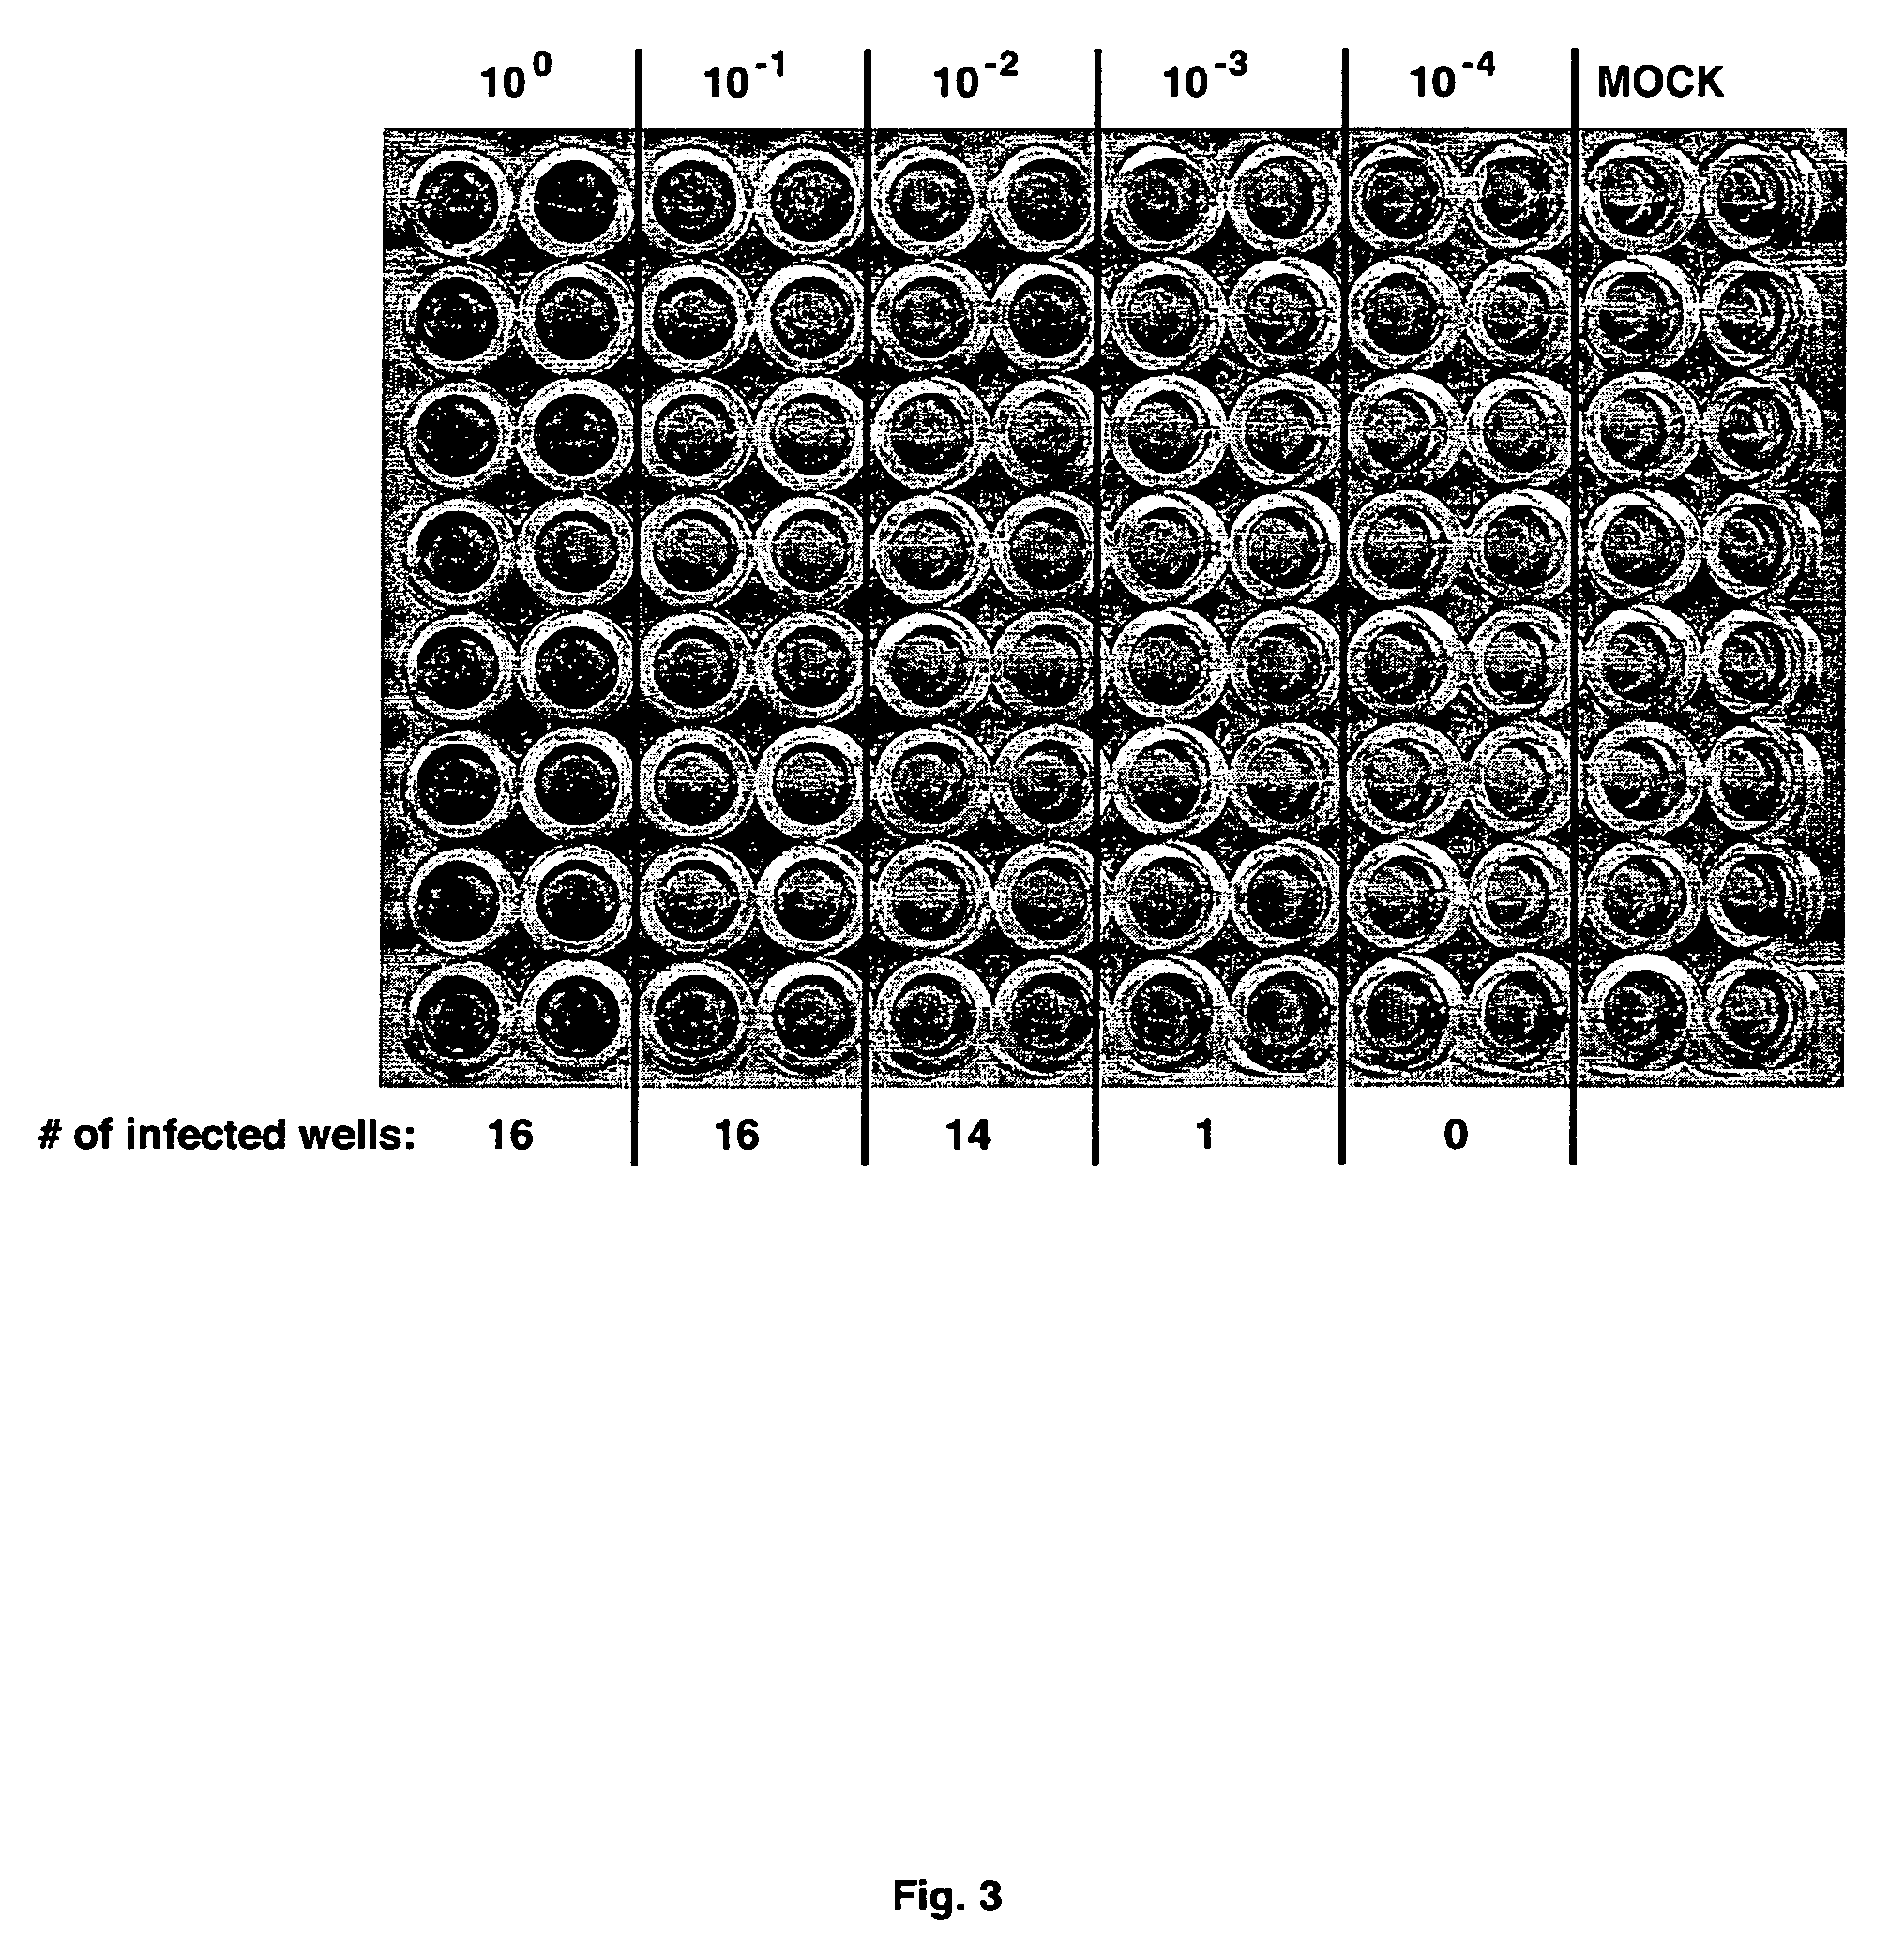 Infectious, chimeric hepatitis C virus, methods of producing the same and methods of use thereof